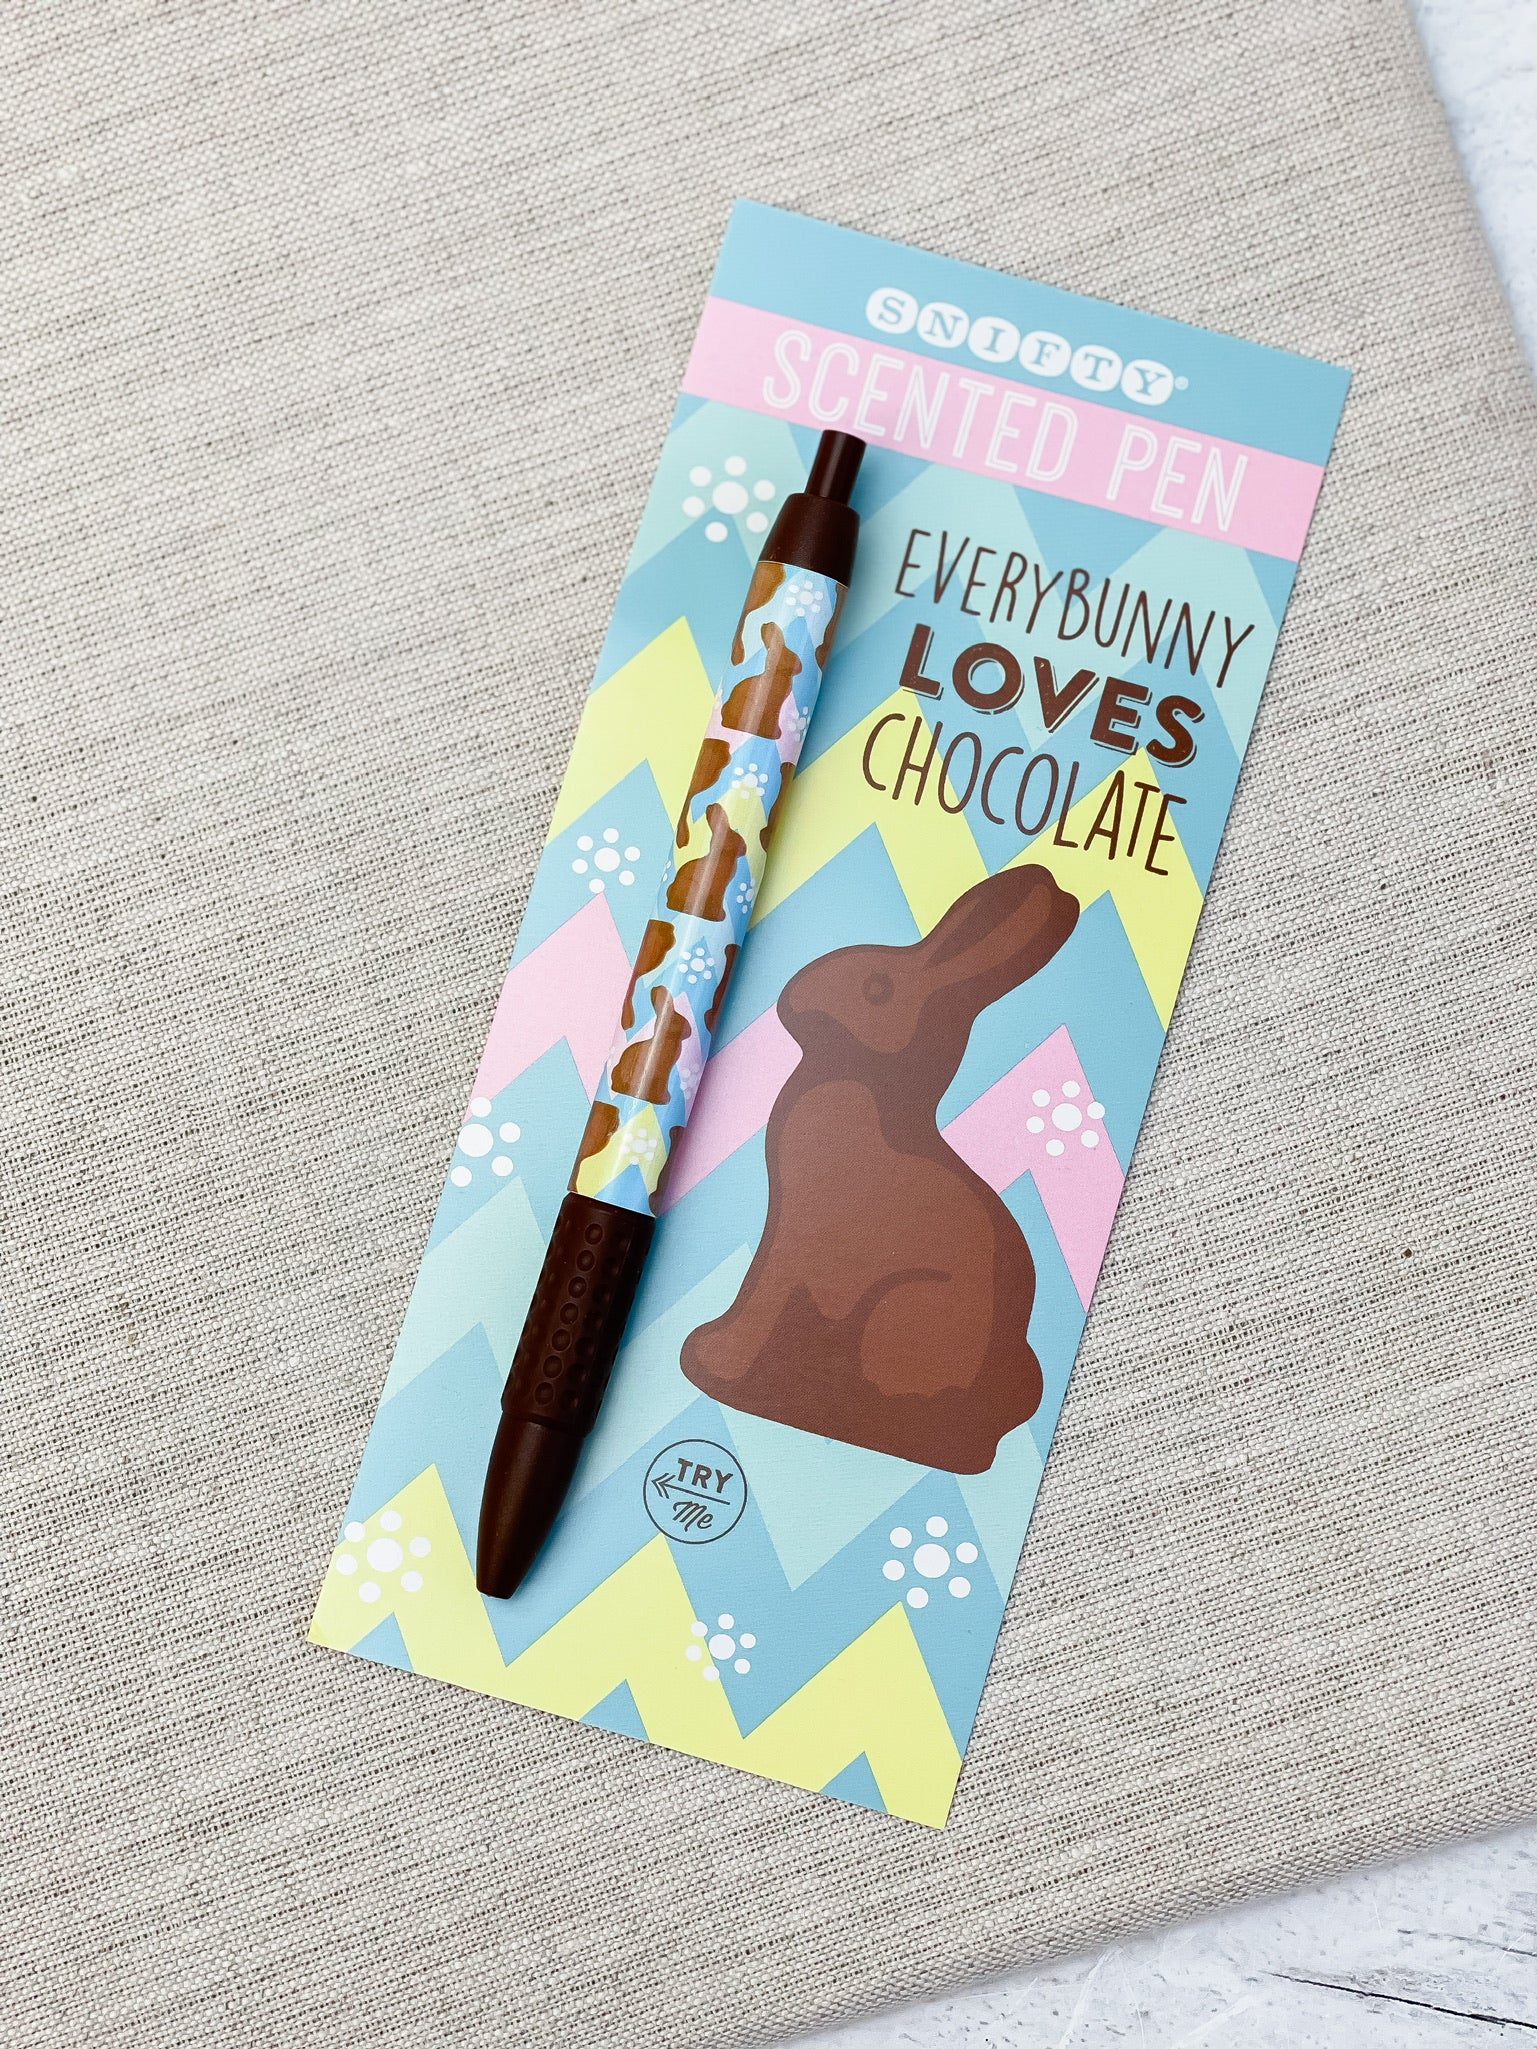 Chocolate Bunny Scented Pen